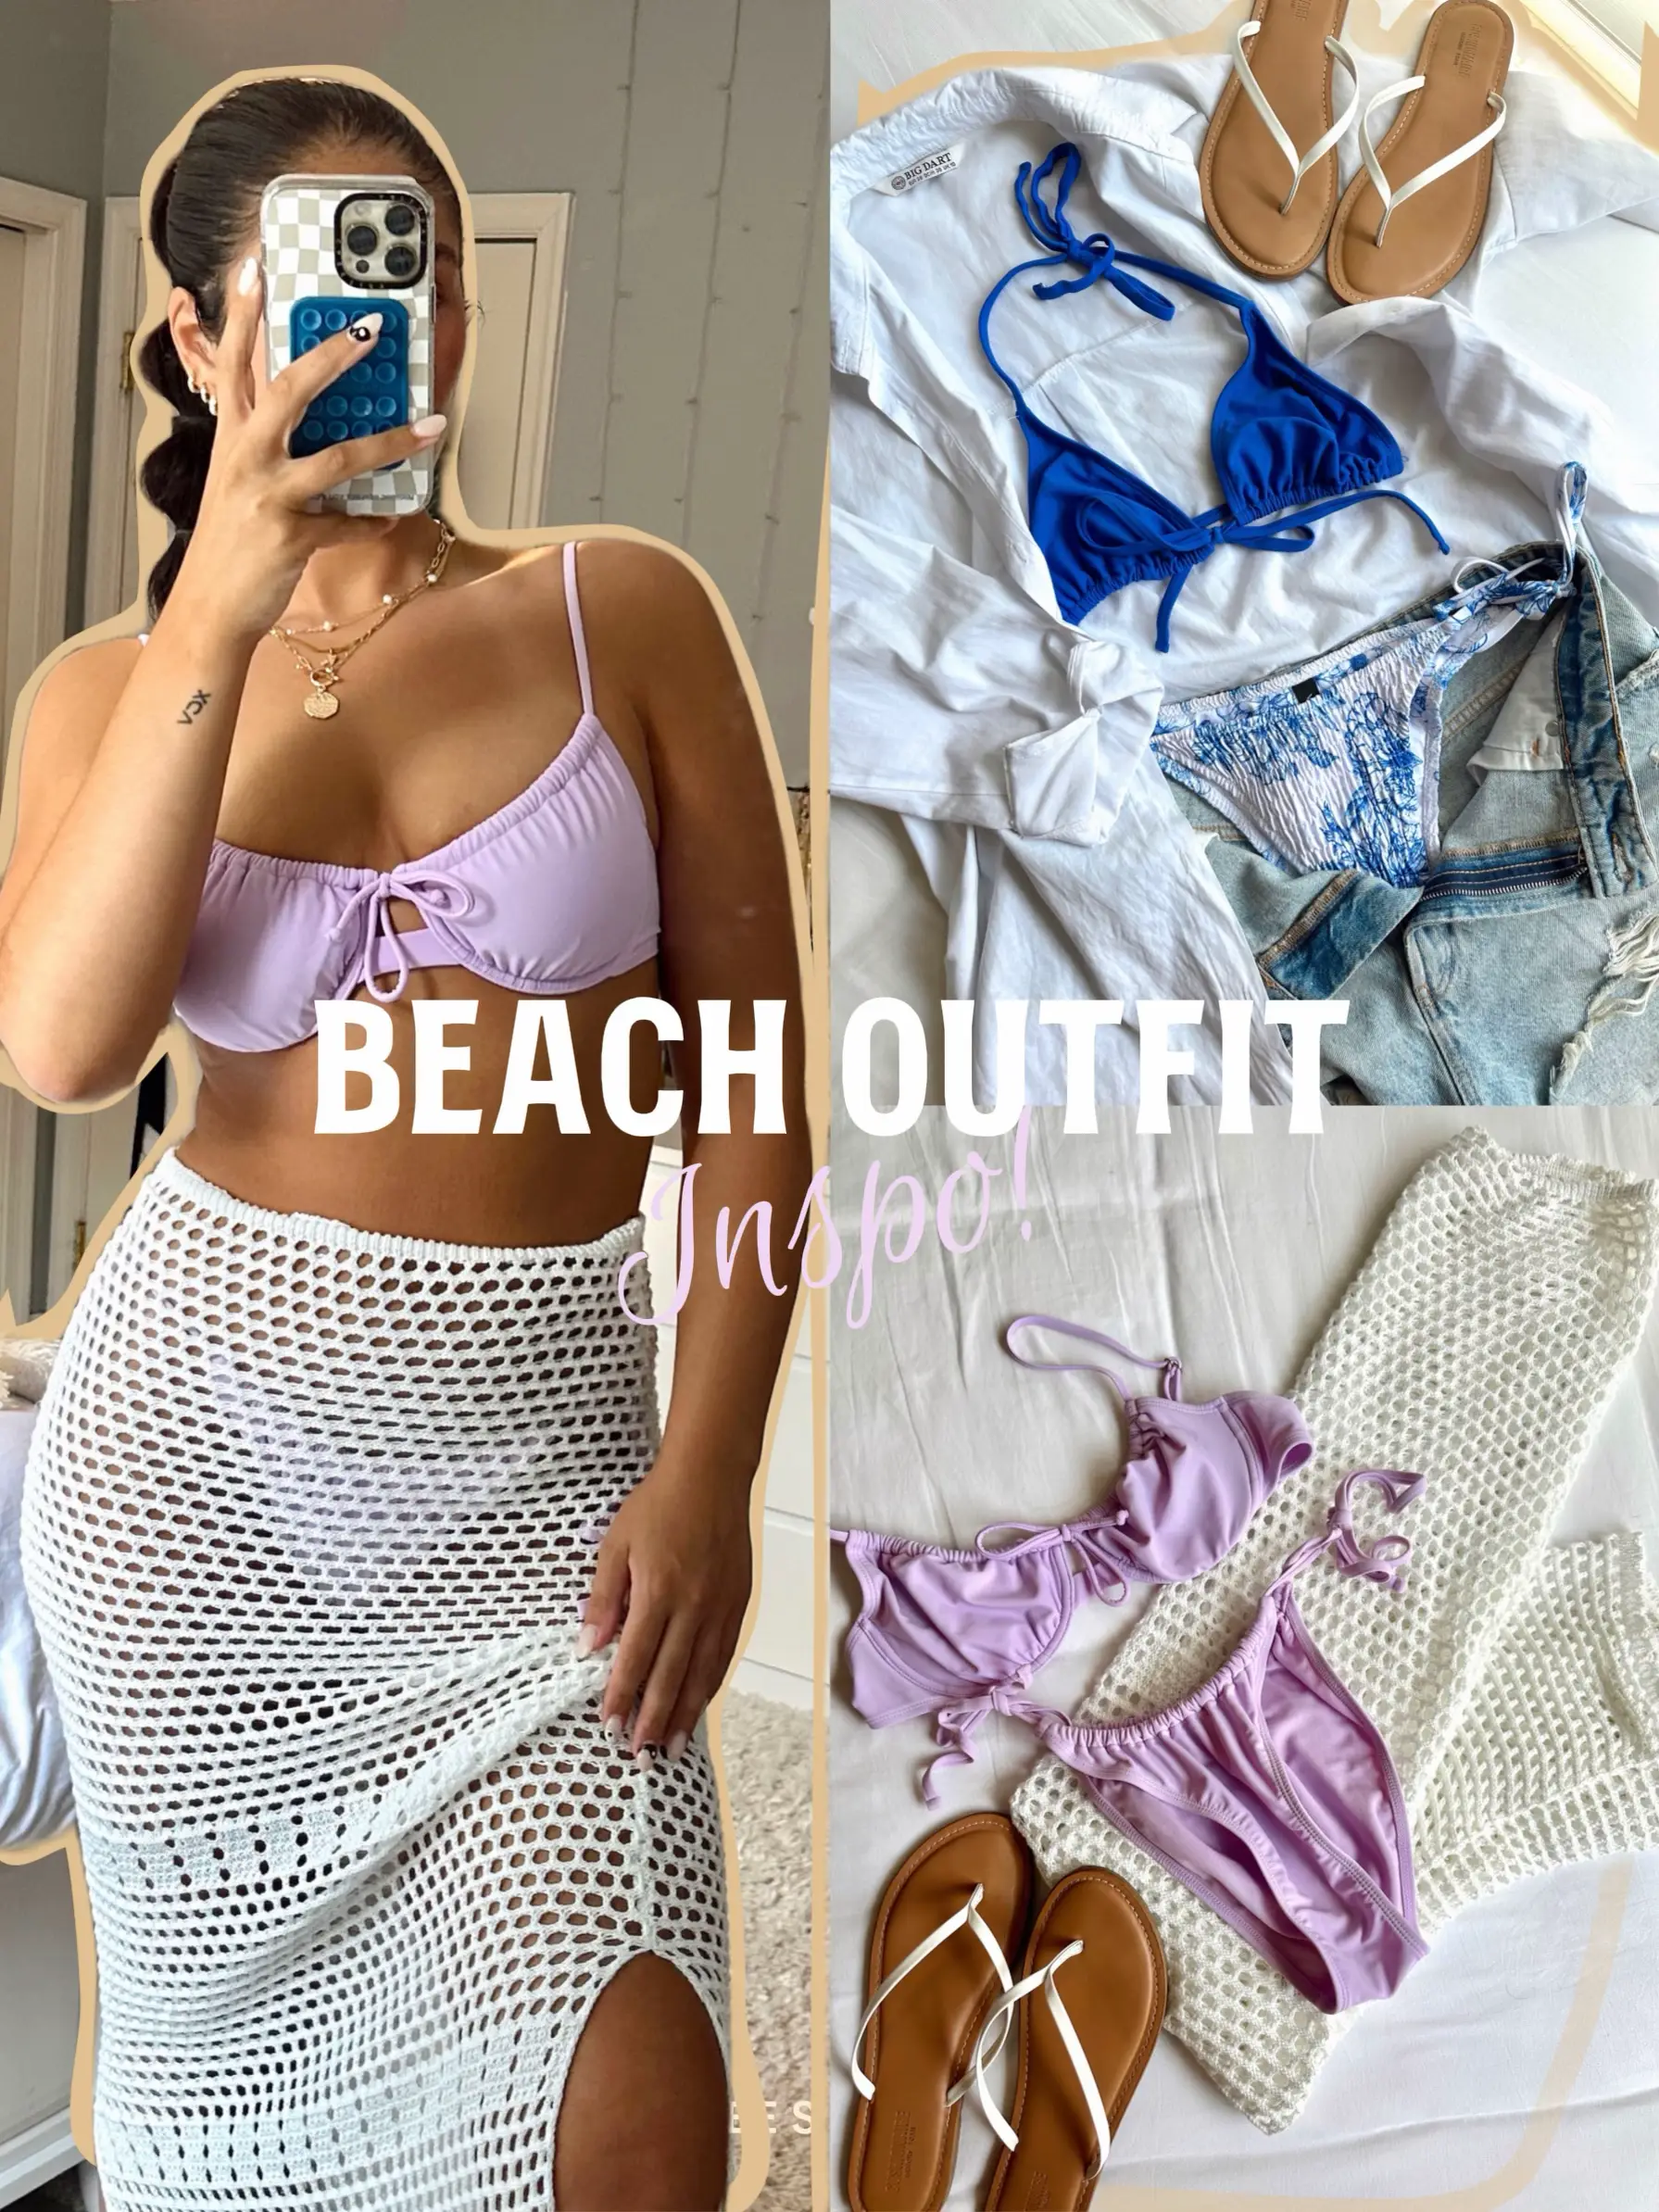 beach outfit inspiration  Bra top outfit, Beach outfit, Top outfits